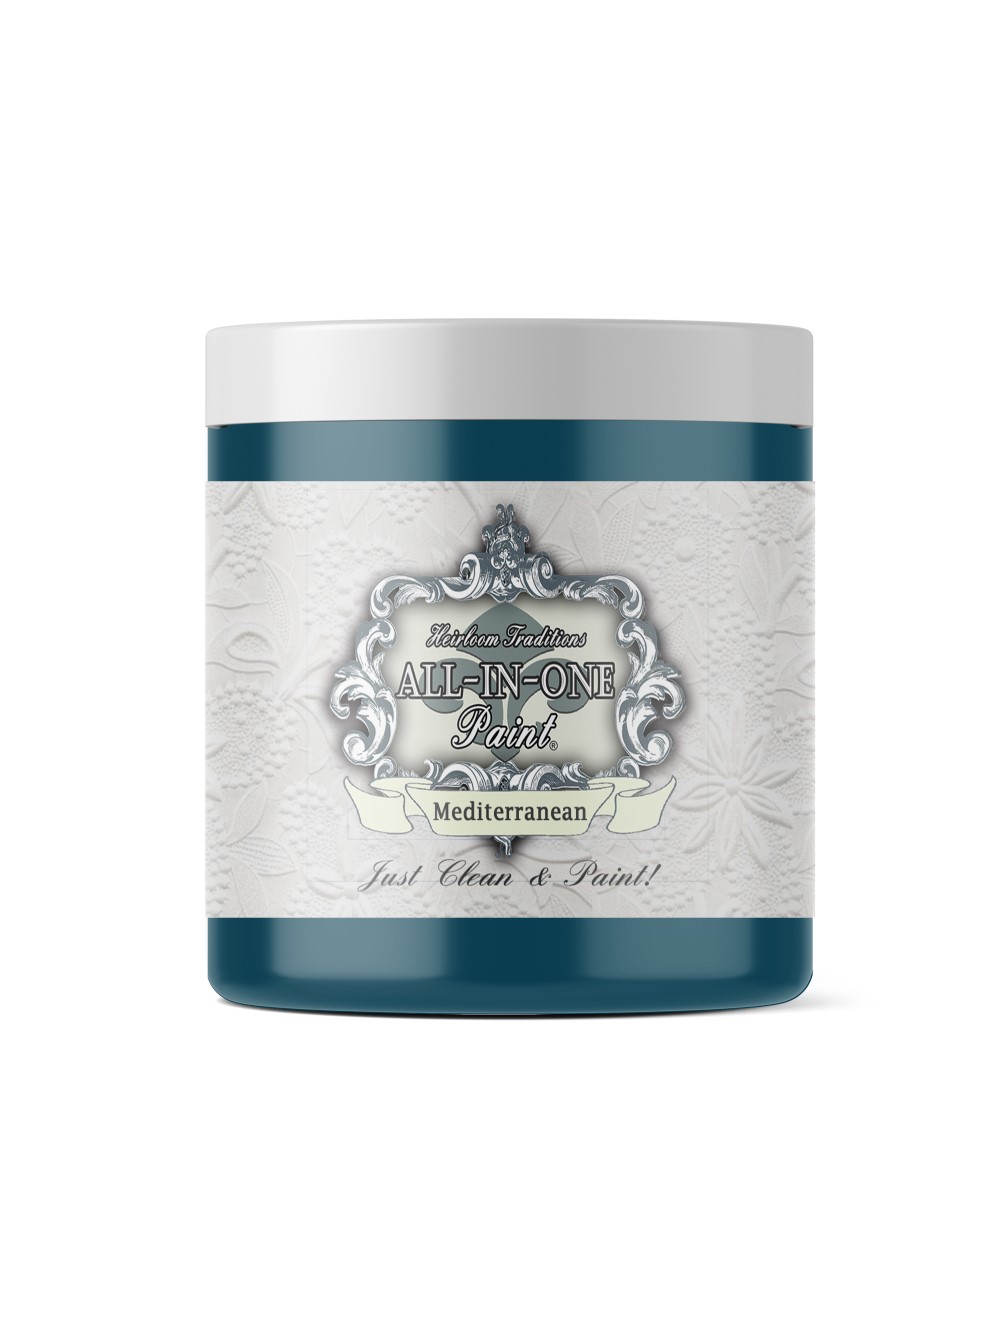 Heirloom Traditions Paint ALL-IN-ONE Paint, Mediterranean (Blue Teal), 8 Fl Oz Sample